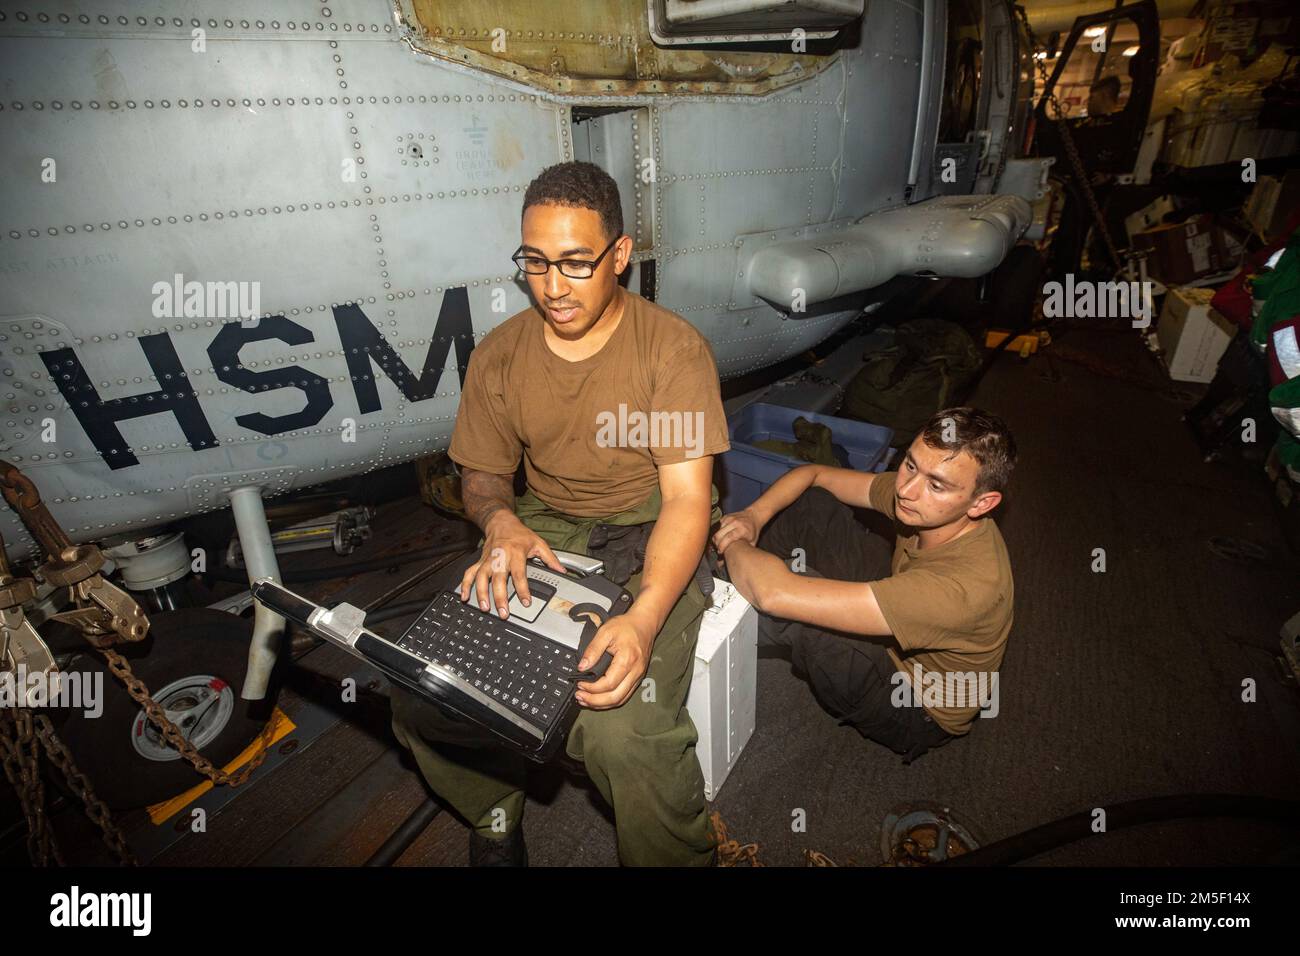 PHILIPPINE SEA (March 9, 2022) Aviation Machinist 3rd Class Tyler John, from Phoenix, Az., and Aviation Machinist Mate 3rd Class Sean Givens, from Texarkana, Texas, conduct maintenance on an MH-60R helicopter aboard Arleigh Burke-class guided-missile destroyer USS Ralph Johnson (DDG 114). Ralph Johnson is assigned to Task Force 71/Destroyer Squadron (DESRON) 15, the Navy’s largest forward-deployed DESRON and the U.S. 7th fleet’s principal surface force. Stock Photo